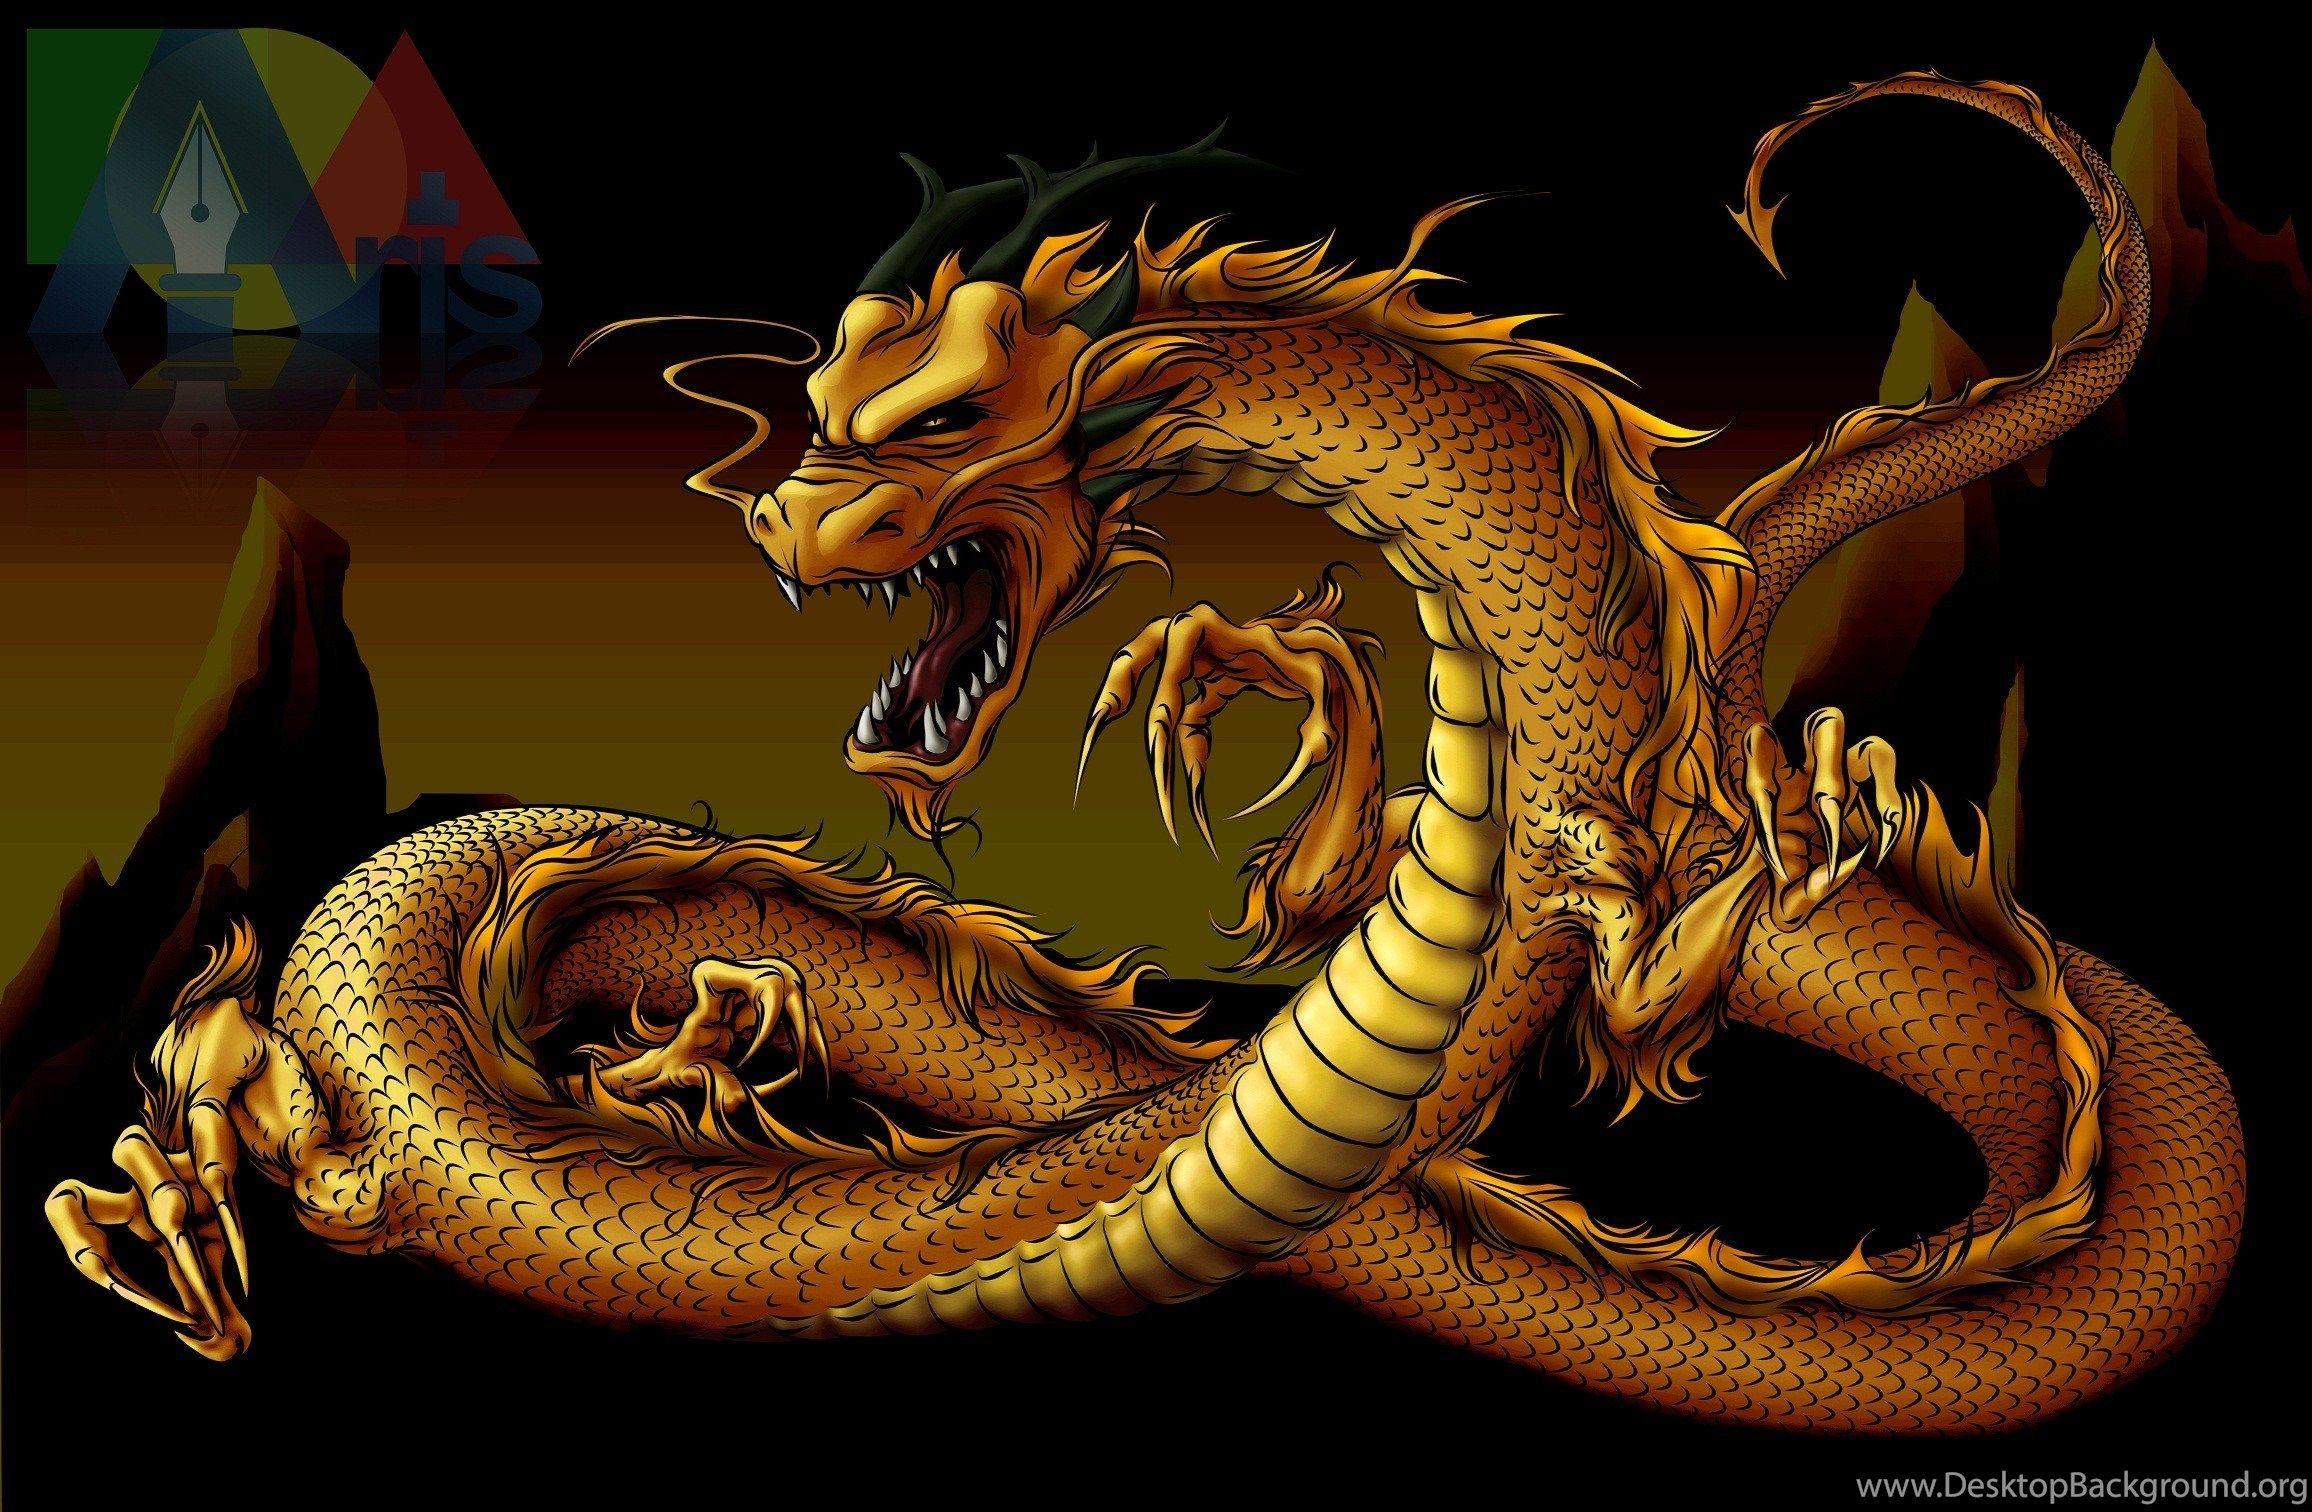 76 Golden Dragon Wallpaper Hd For Android Images & Pictures - MyWeb